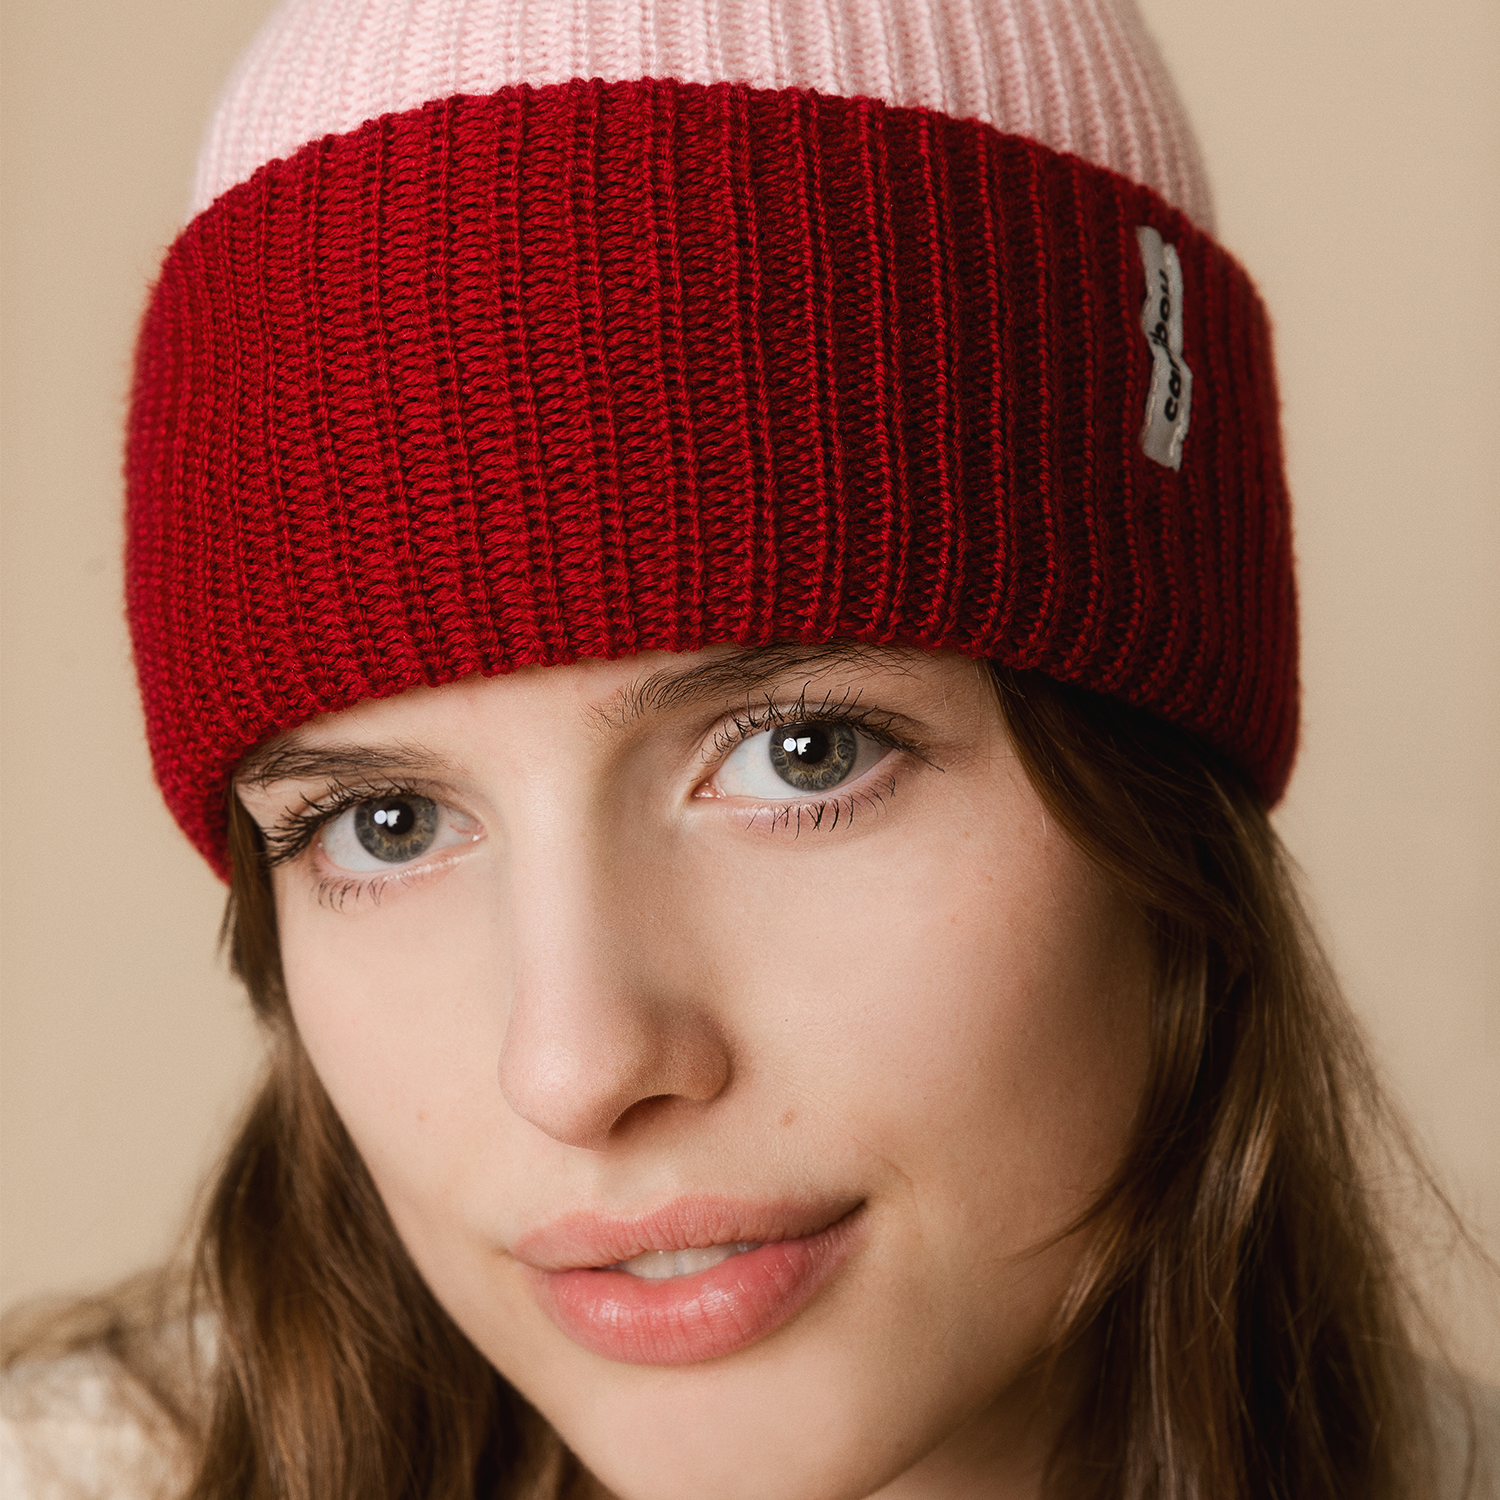 Tuque - Roselin